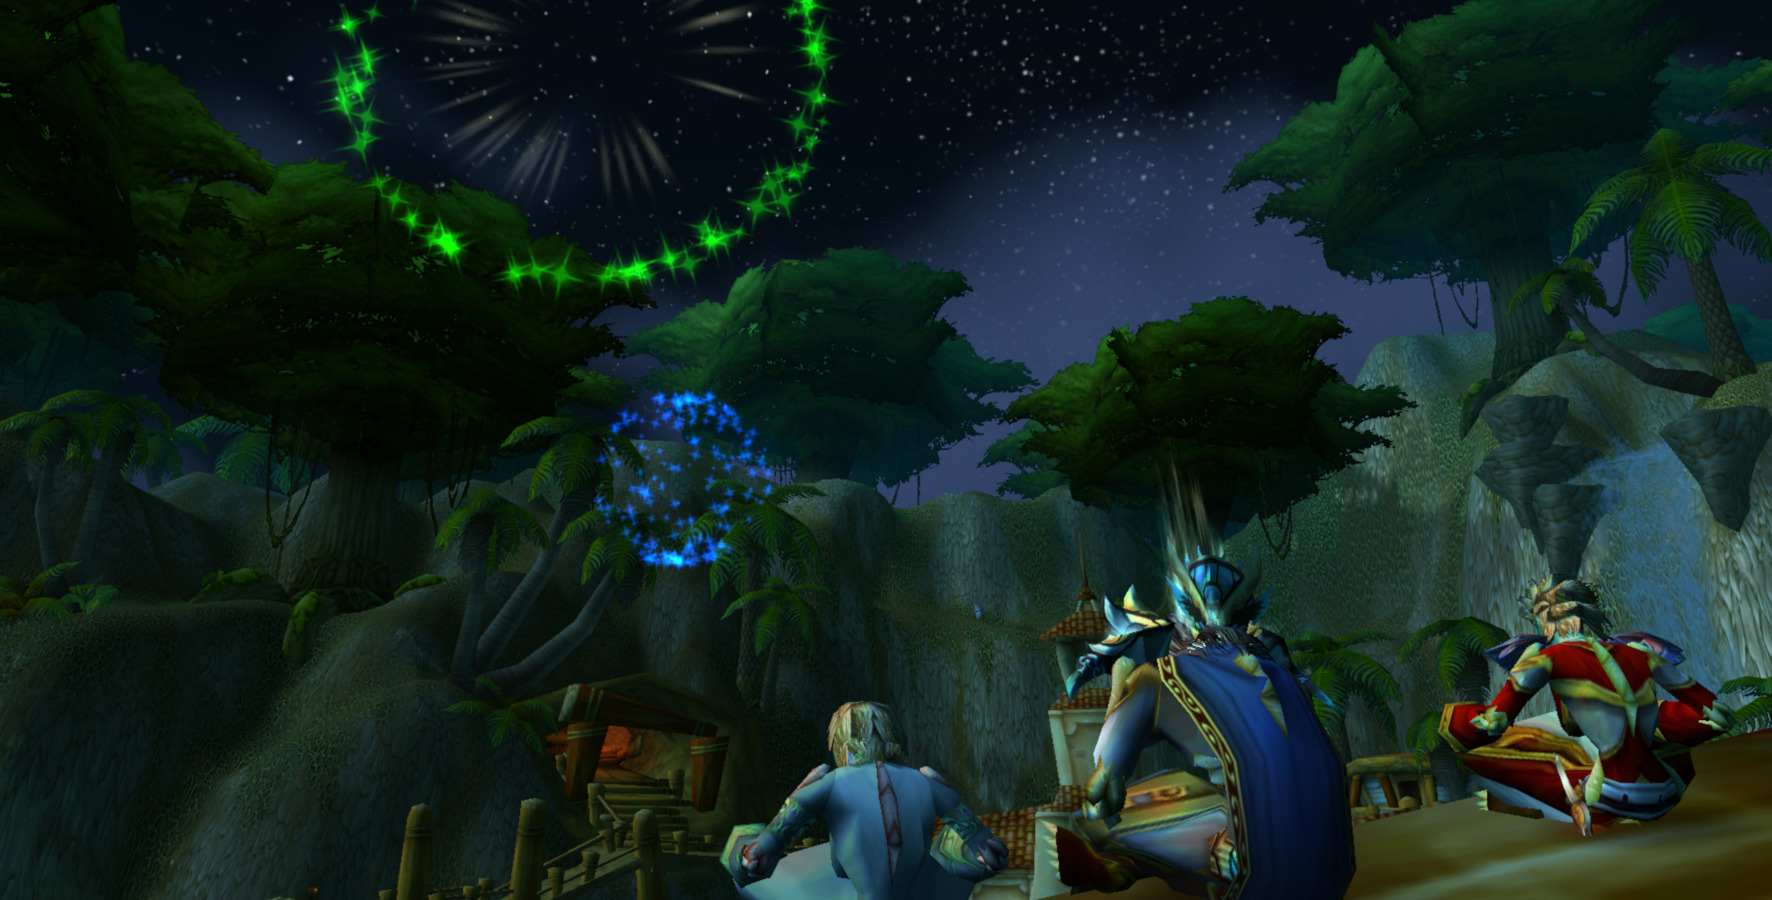 Celebrating July 4th in-game with the people that mean the most to me.